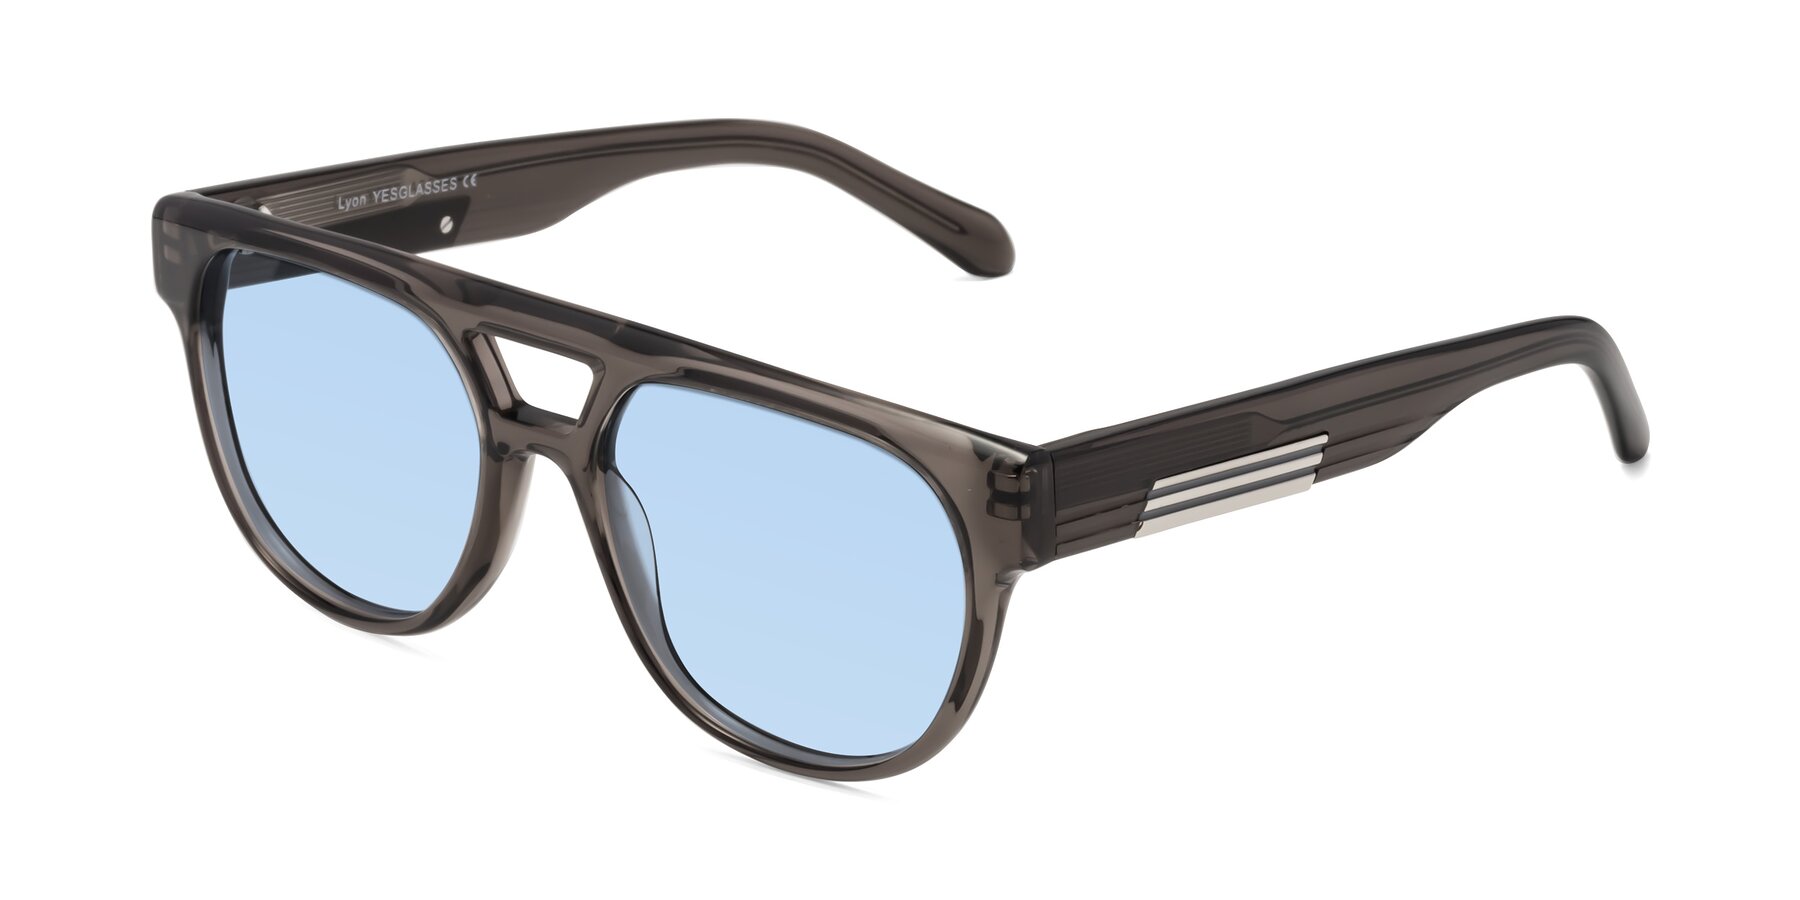 Angle of Lyon in Charcoal Gray with Light Blue Tinted Lenses